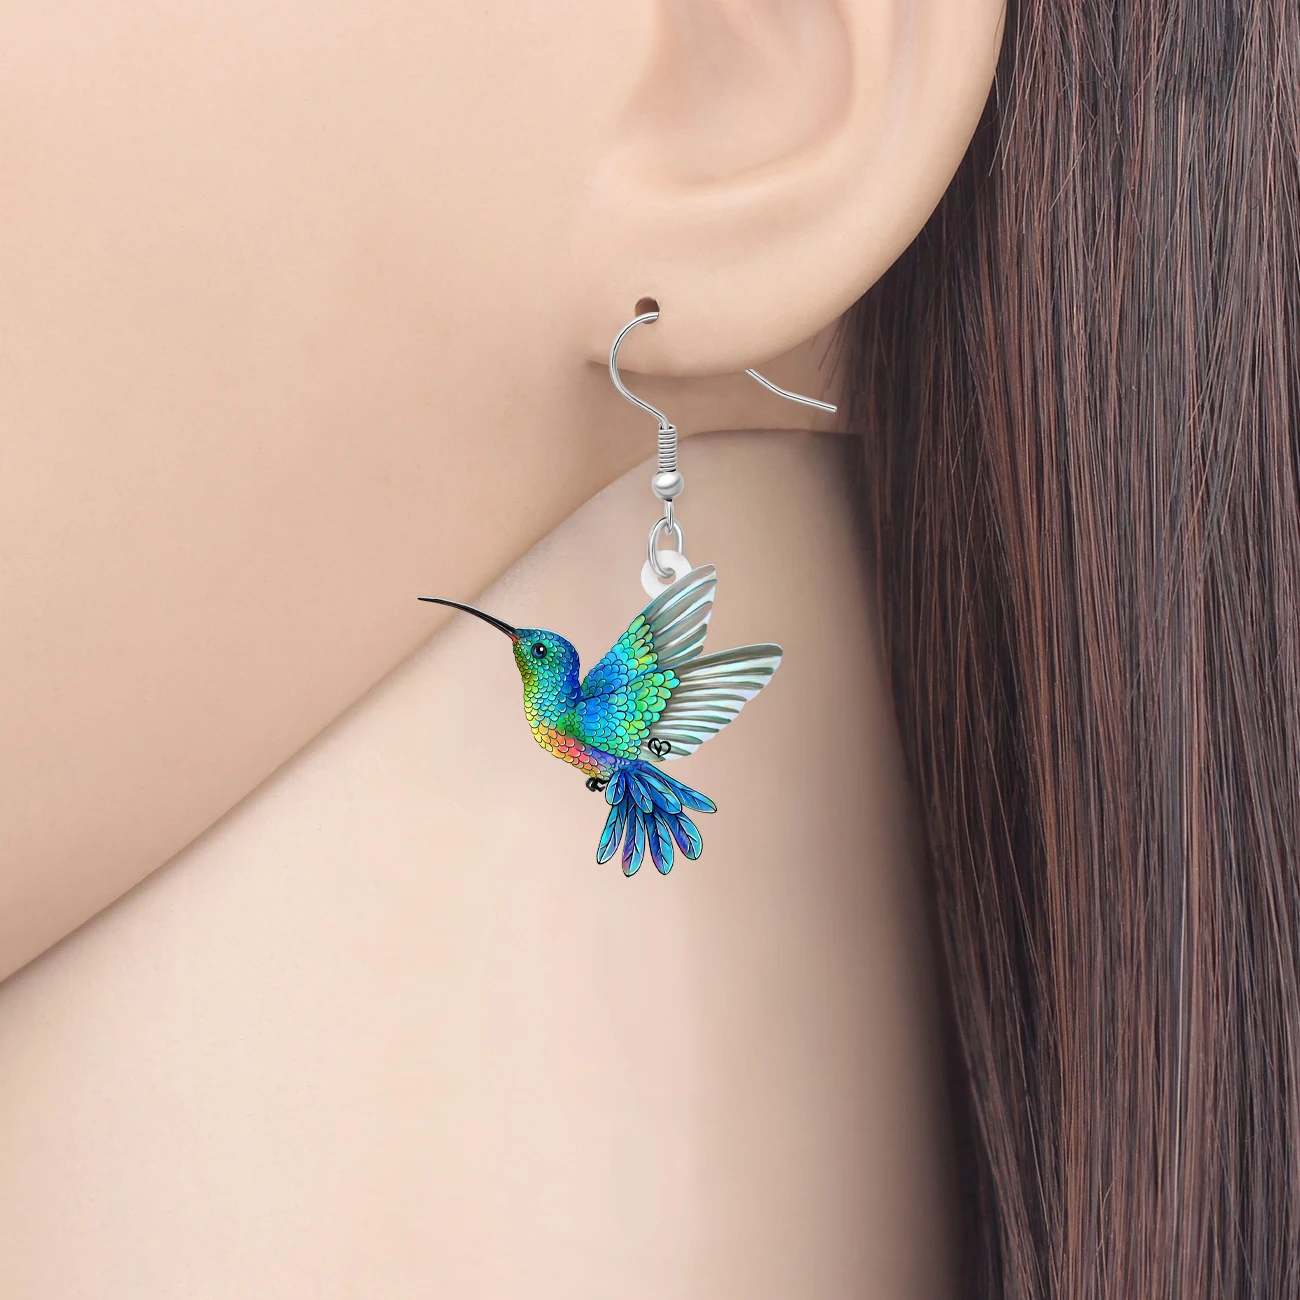 BONSNY Acrylic Flying Hummingbird Drop Dangle Earrings Spring Summer Bird Jewelry for Women Girls Kids Charms Gifts Accessories